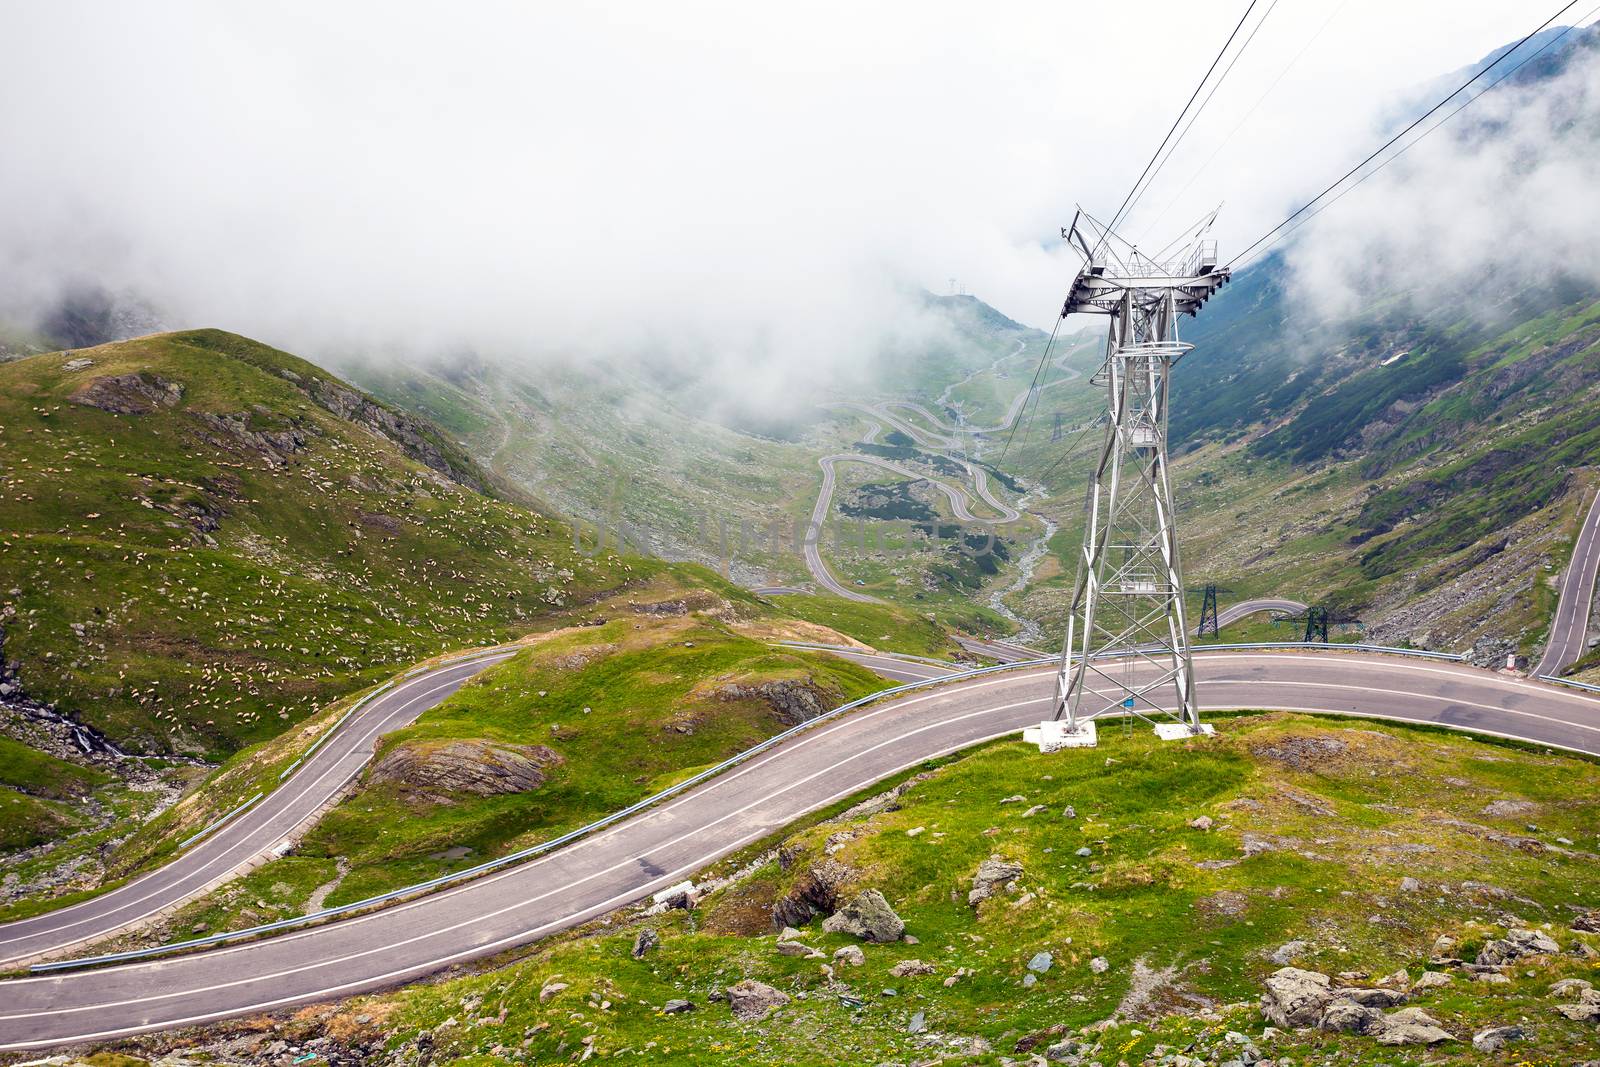 Transfagarasan mountain road with from Romania covered with fog